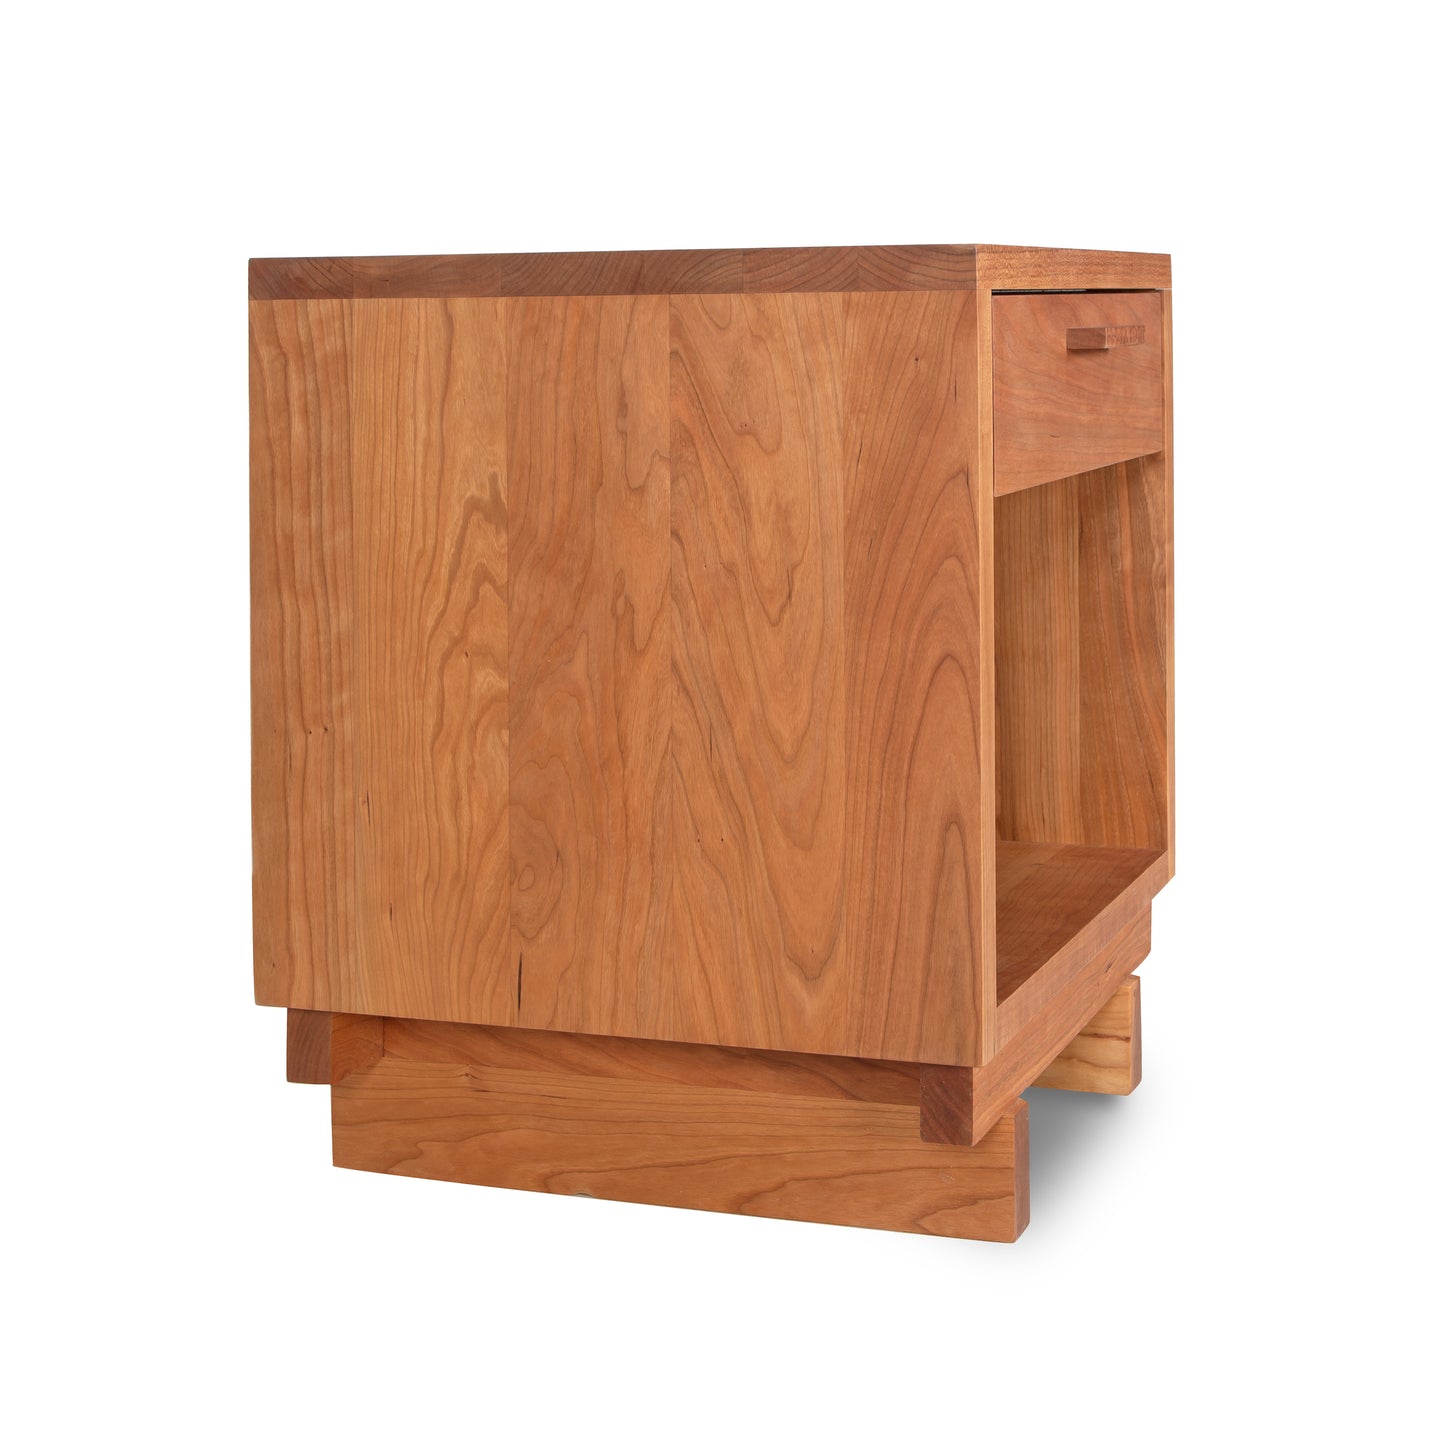 A modern wooden Loft 1-Drawer Enclosed Shelf Nightstand from Vermont Furniture Designs, perfect as a bedside table.